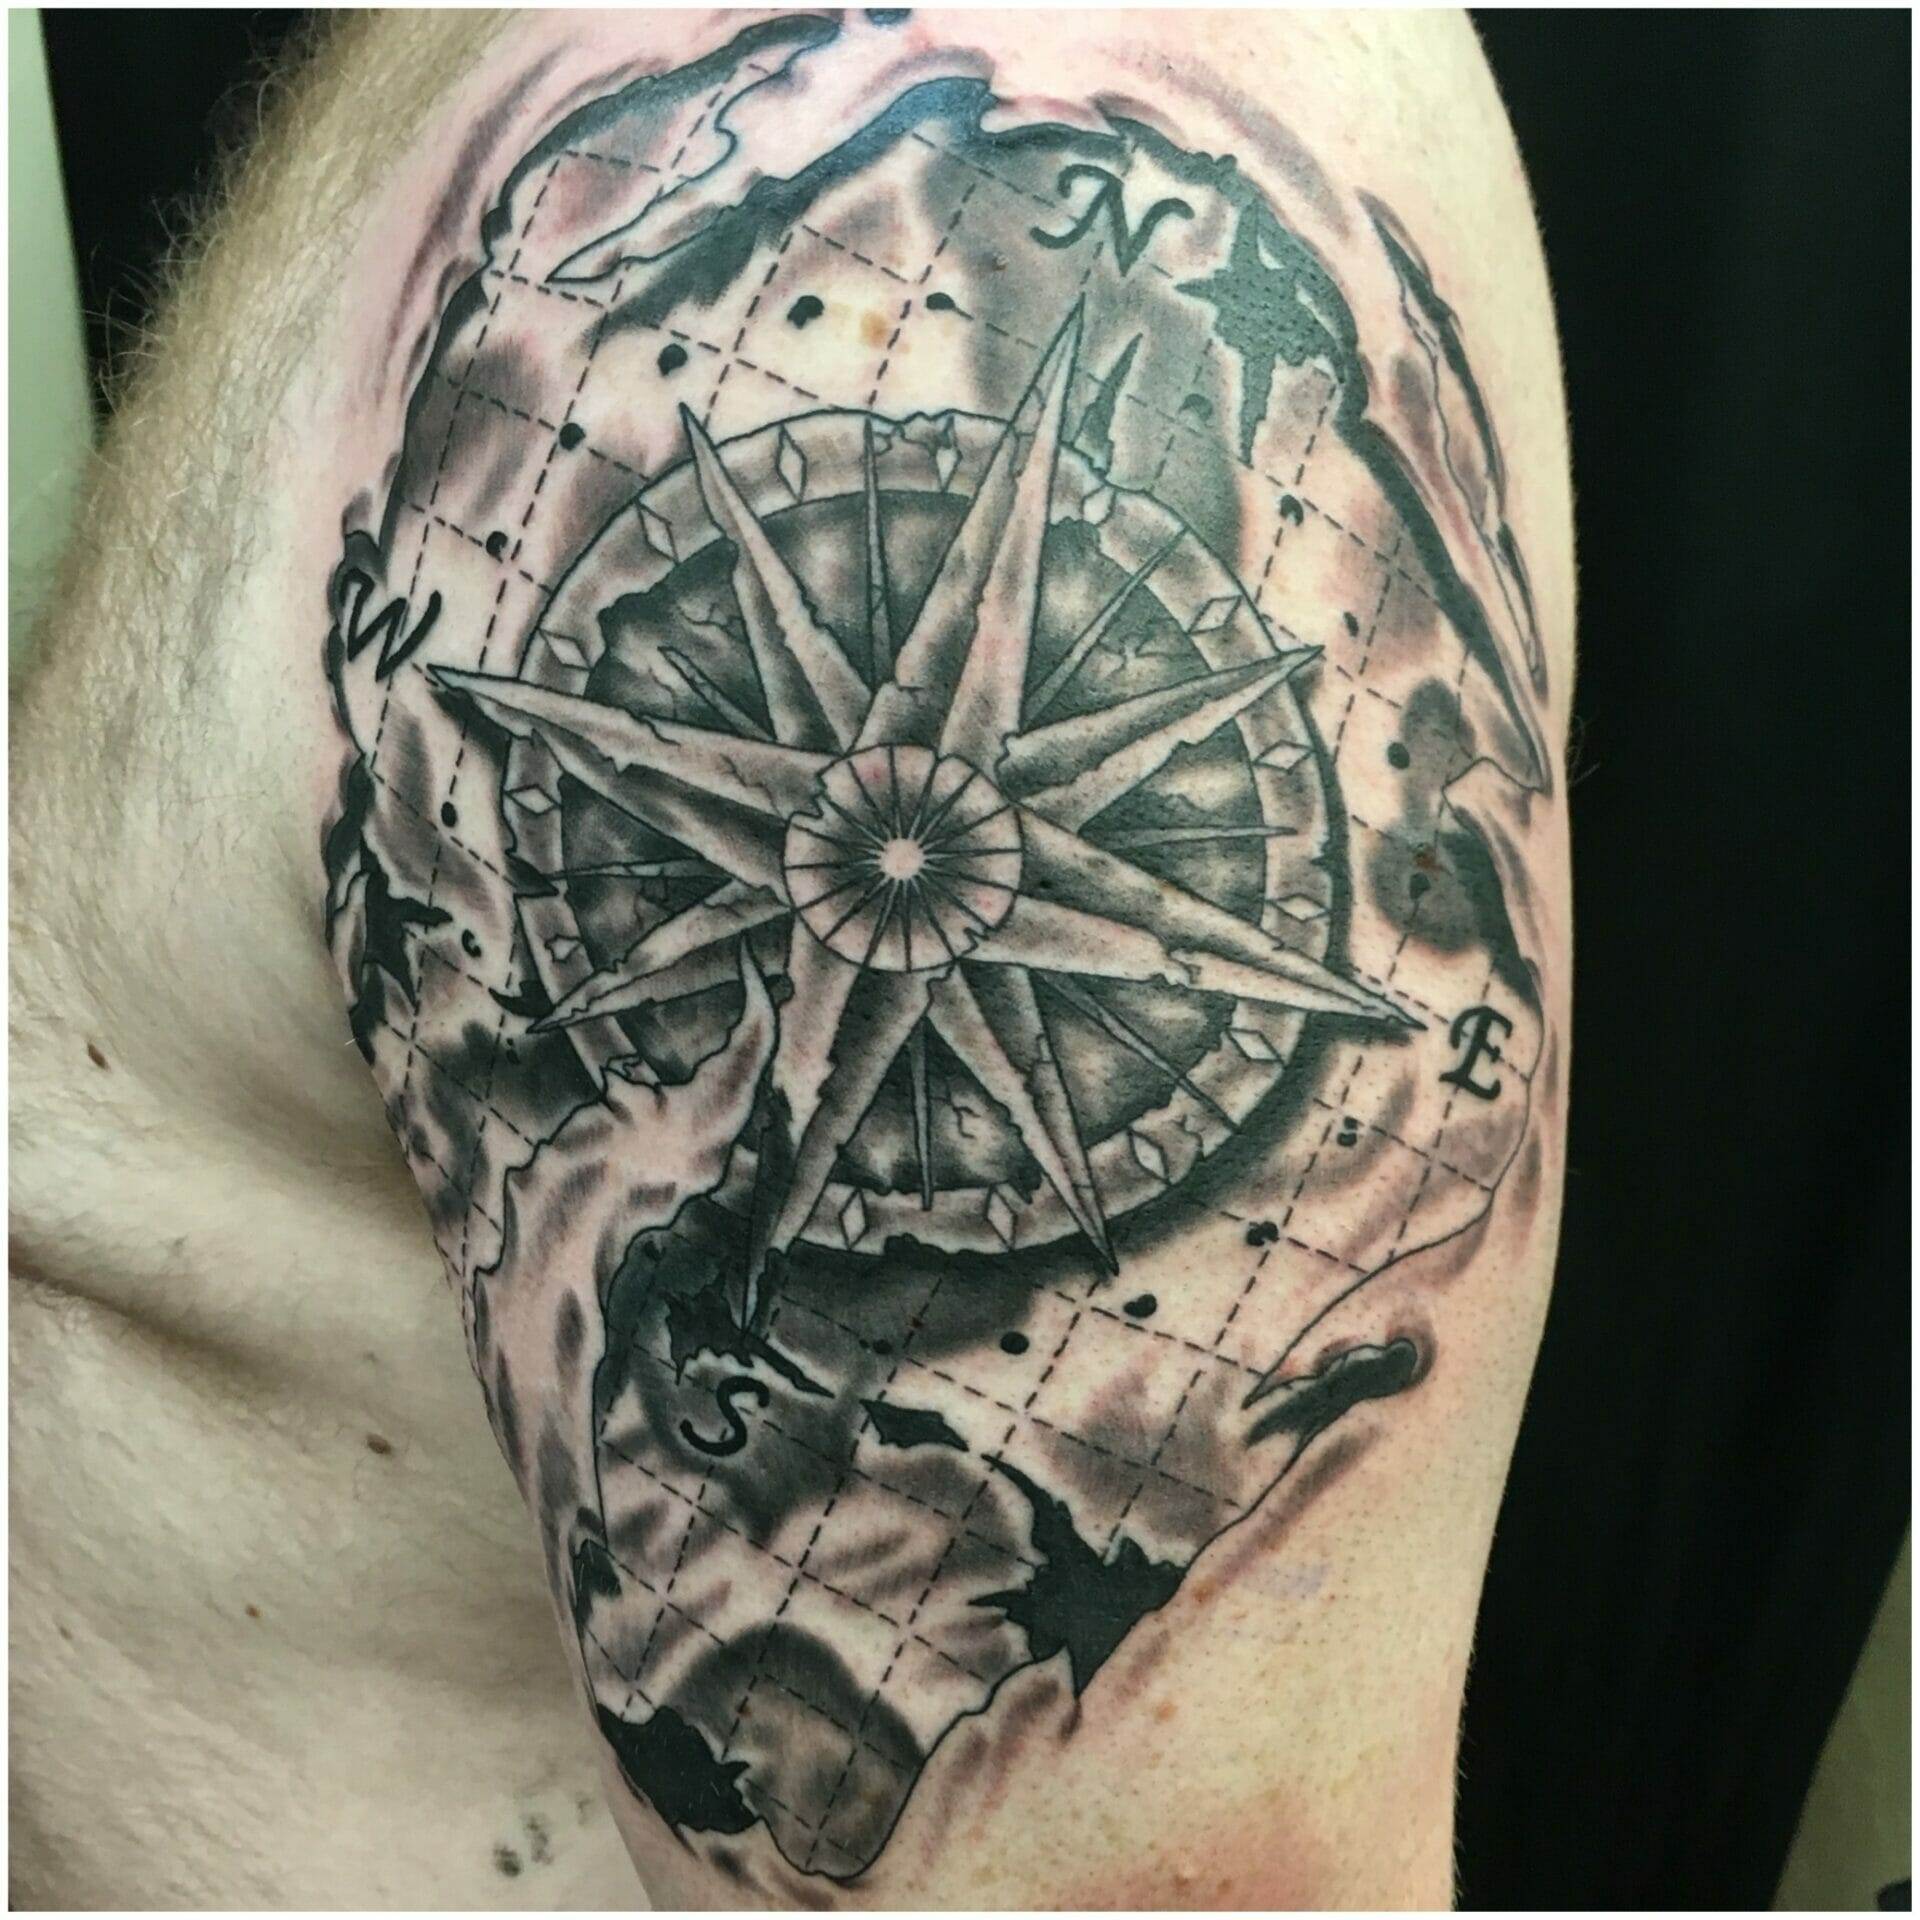 Tattoo addicted - A compass tattoo is a common sight among fishermen and  sailors. ... This is basically similar to how seafarers regard compass  tattoos as a symbol for guidance and protection.